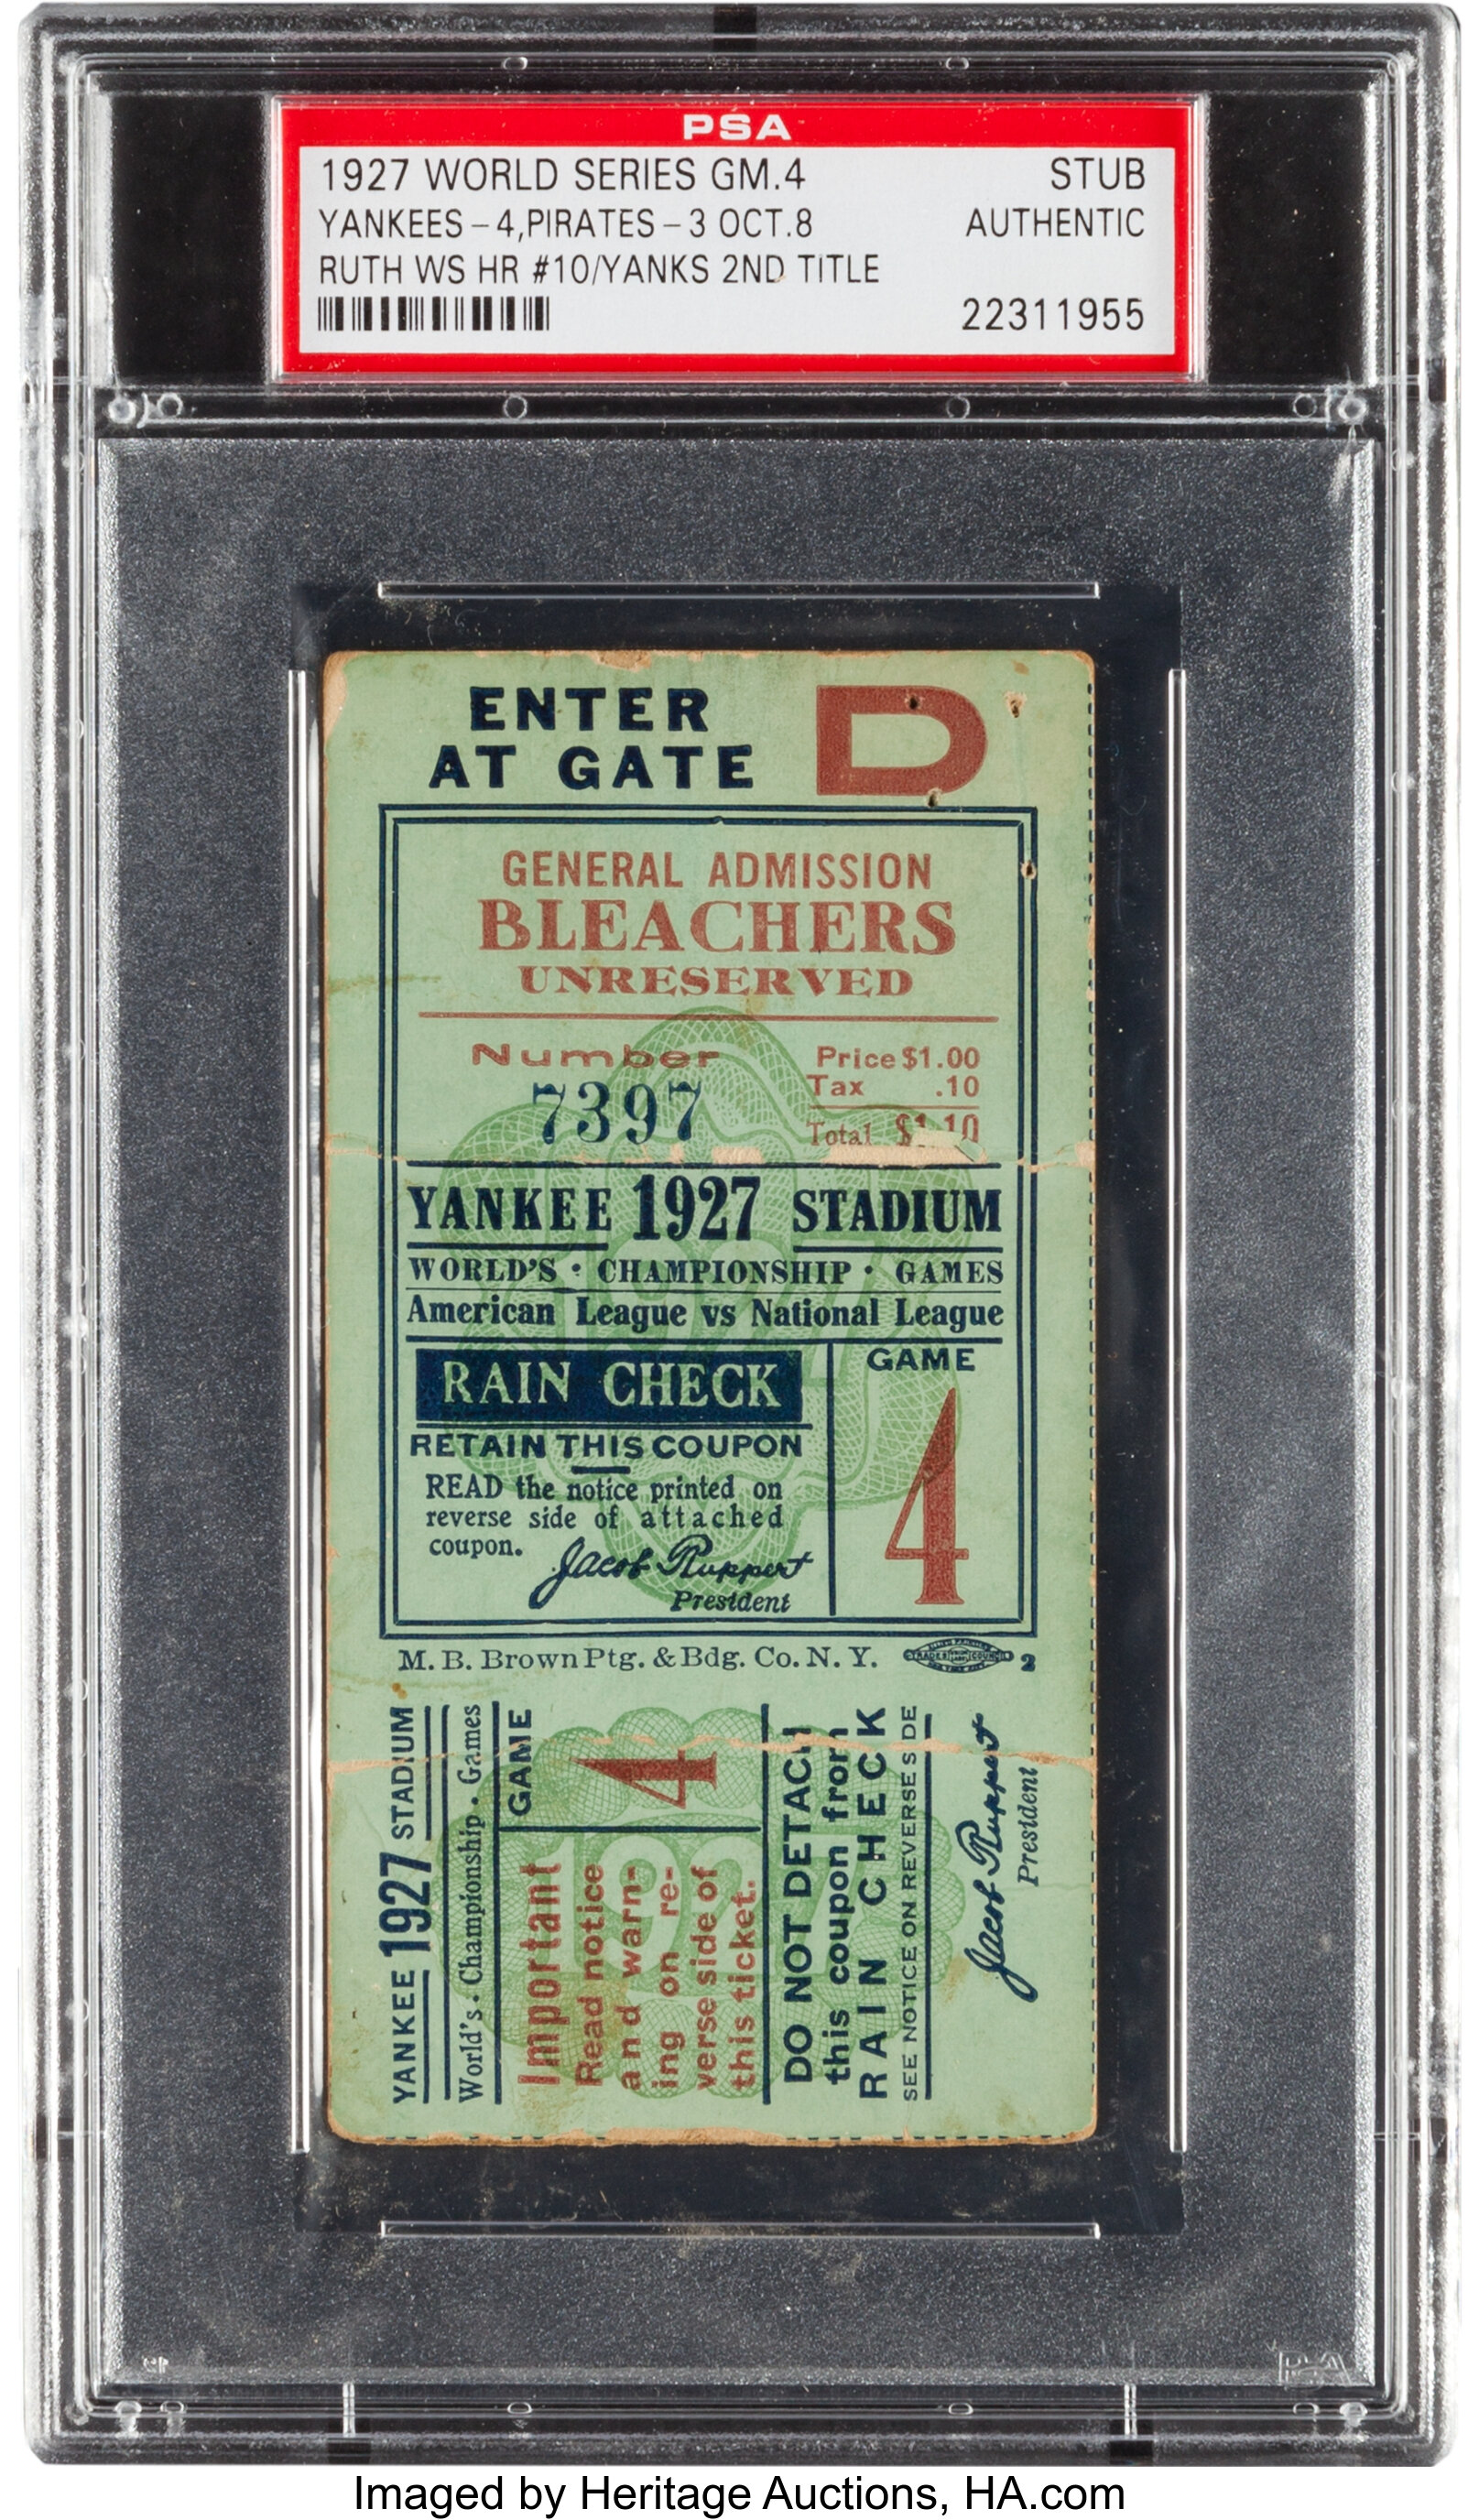 1927 World Series Game Four Ticket Stub. Baseball Collectibles